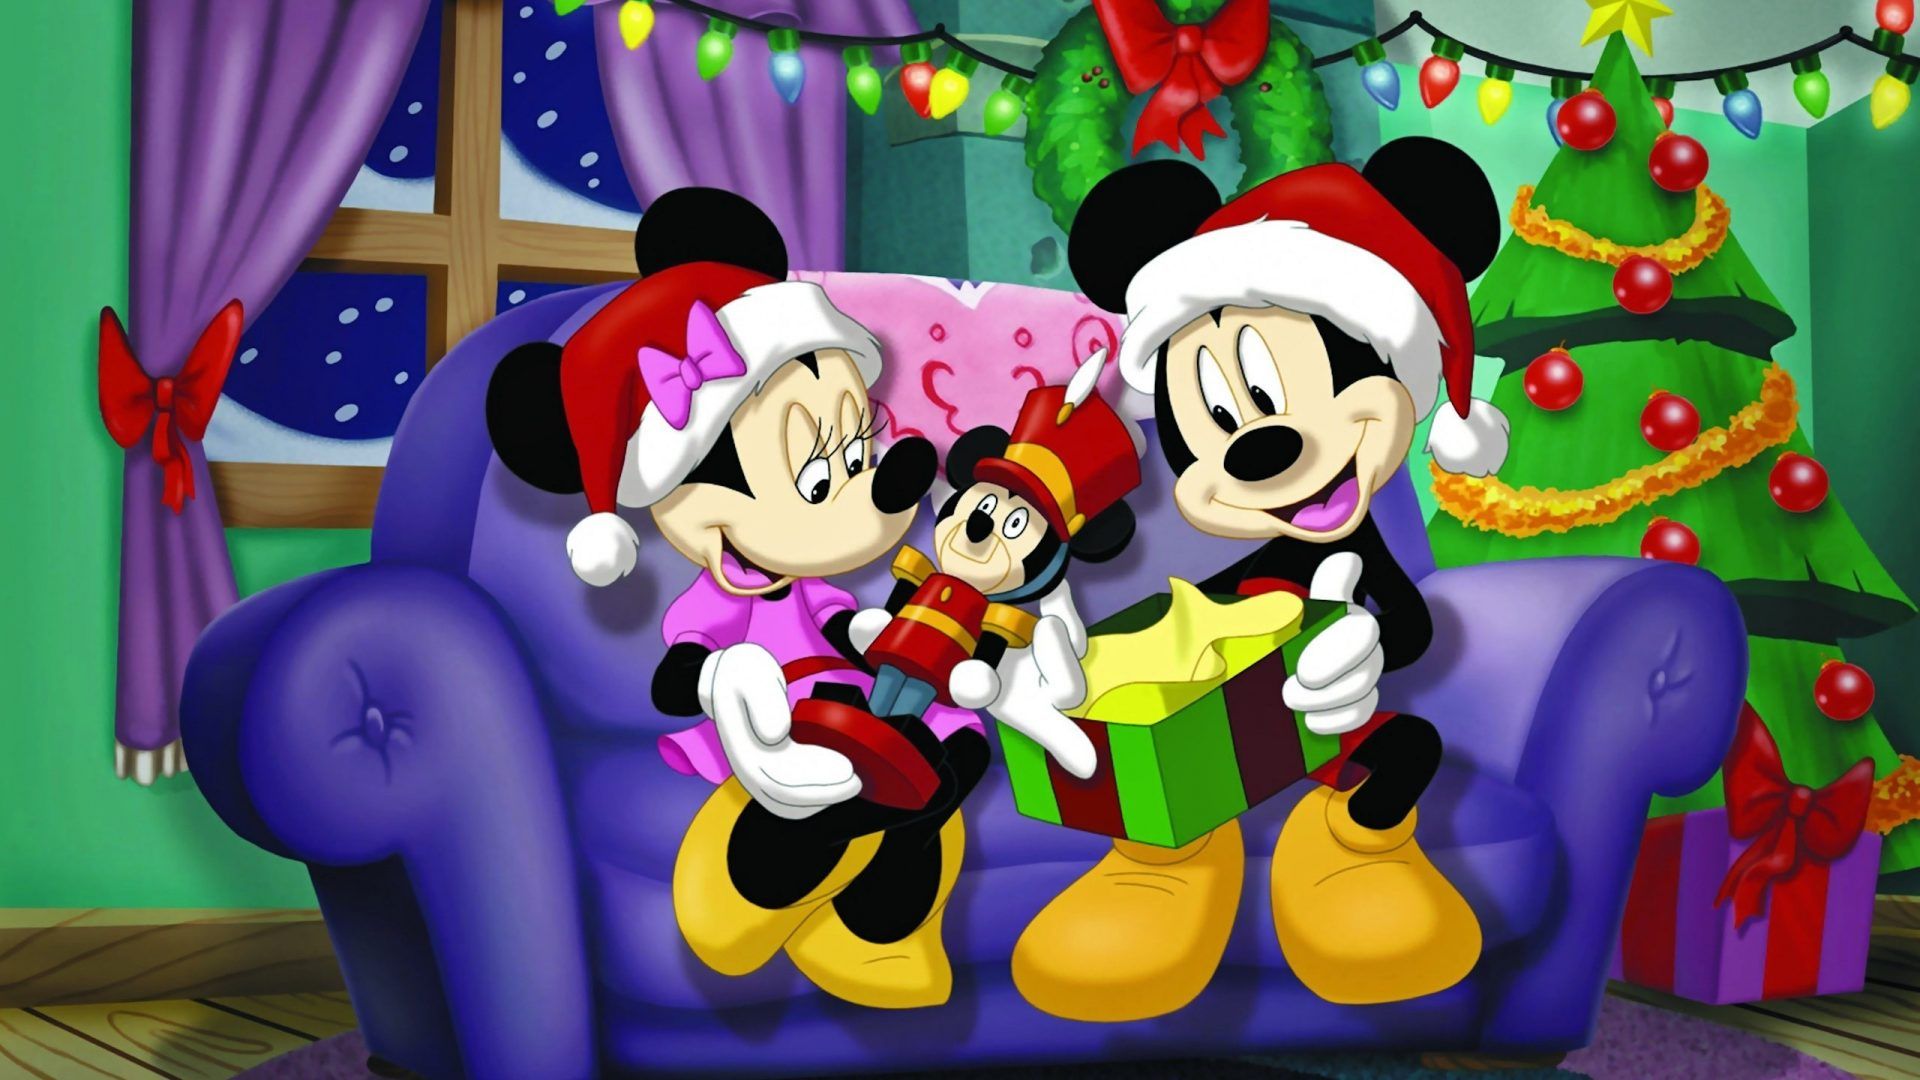 Mickey Mouse And Minnie Mouse Christmas Gifts Desktop Background 2560x1600, Wallpaper13.com